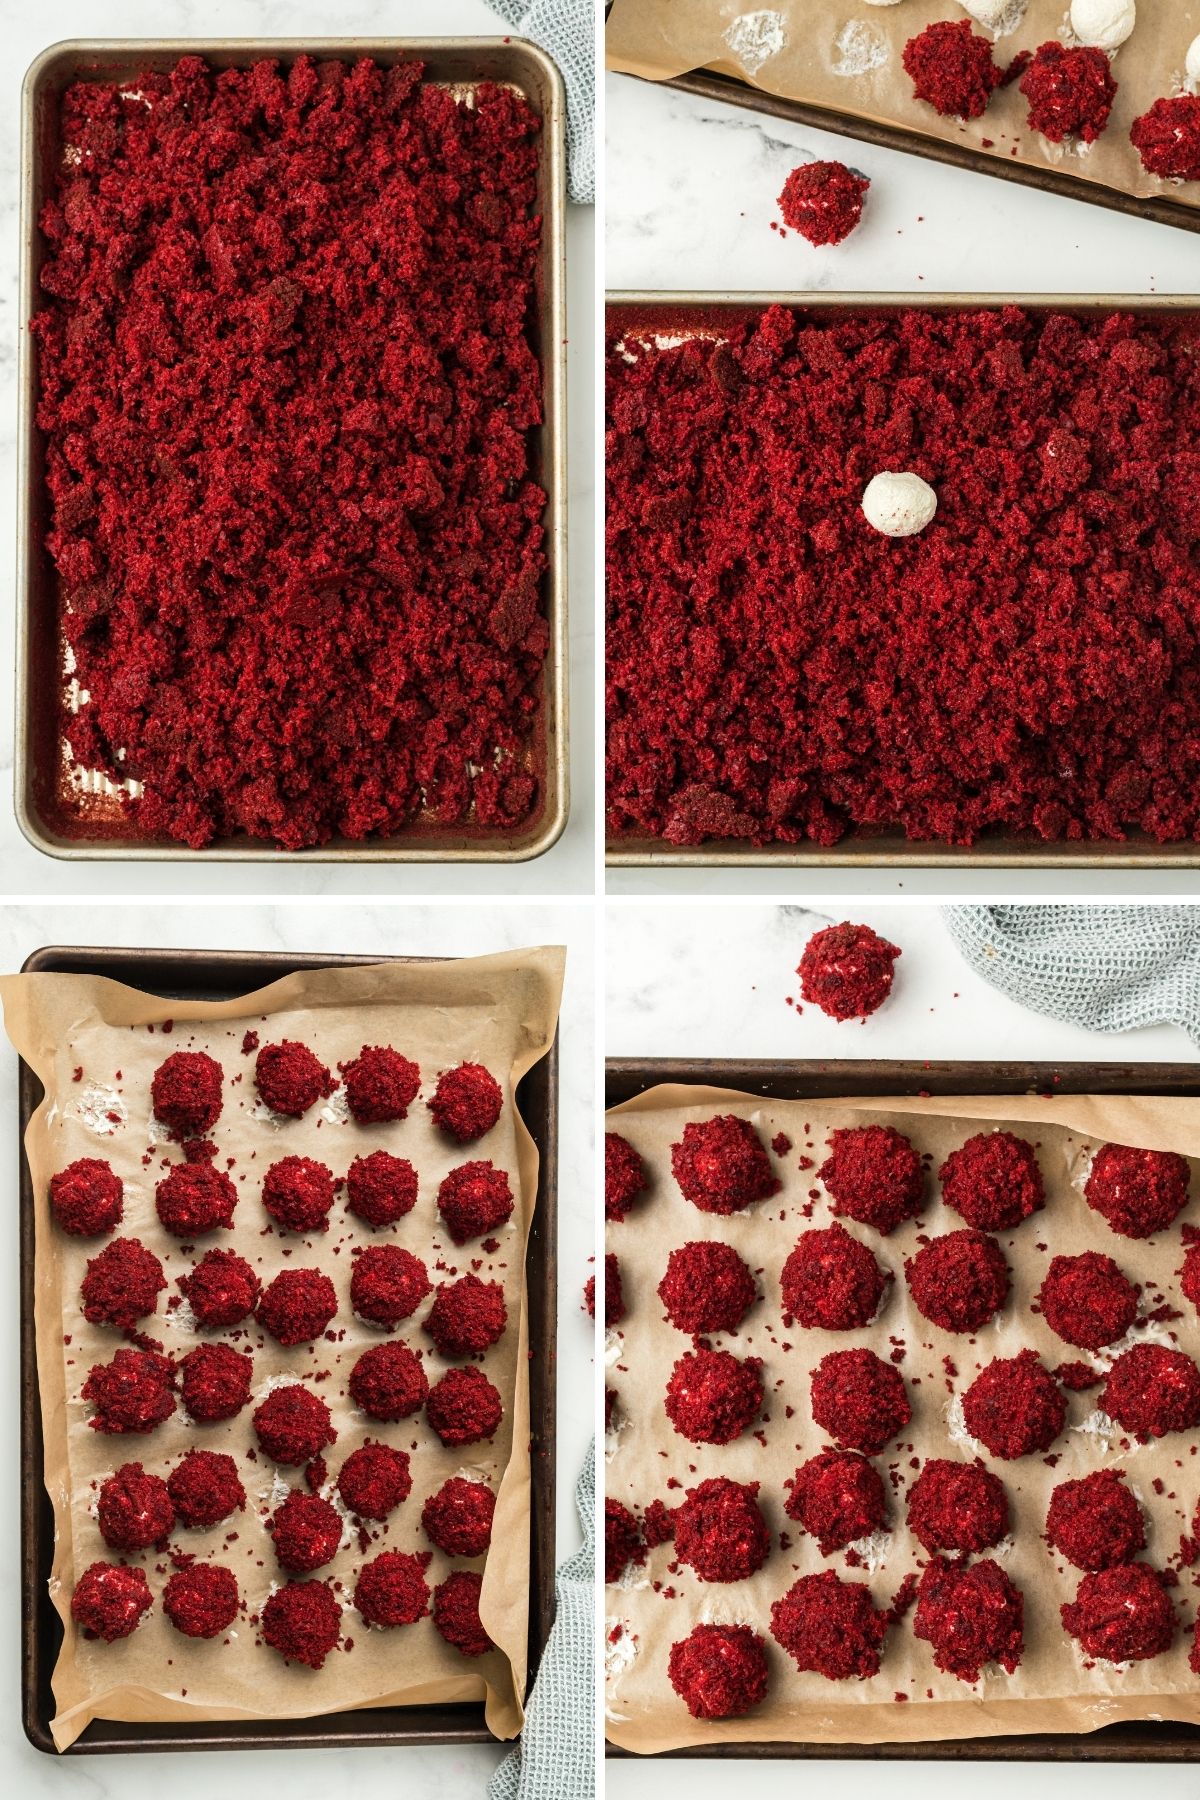 four images: red velvet cake crumbled up on a baking sheet; white cream cheese ball in middle of red velvet crumbles; red velvet balls on baking sheet